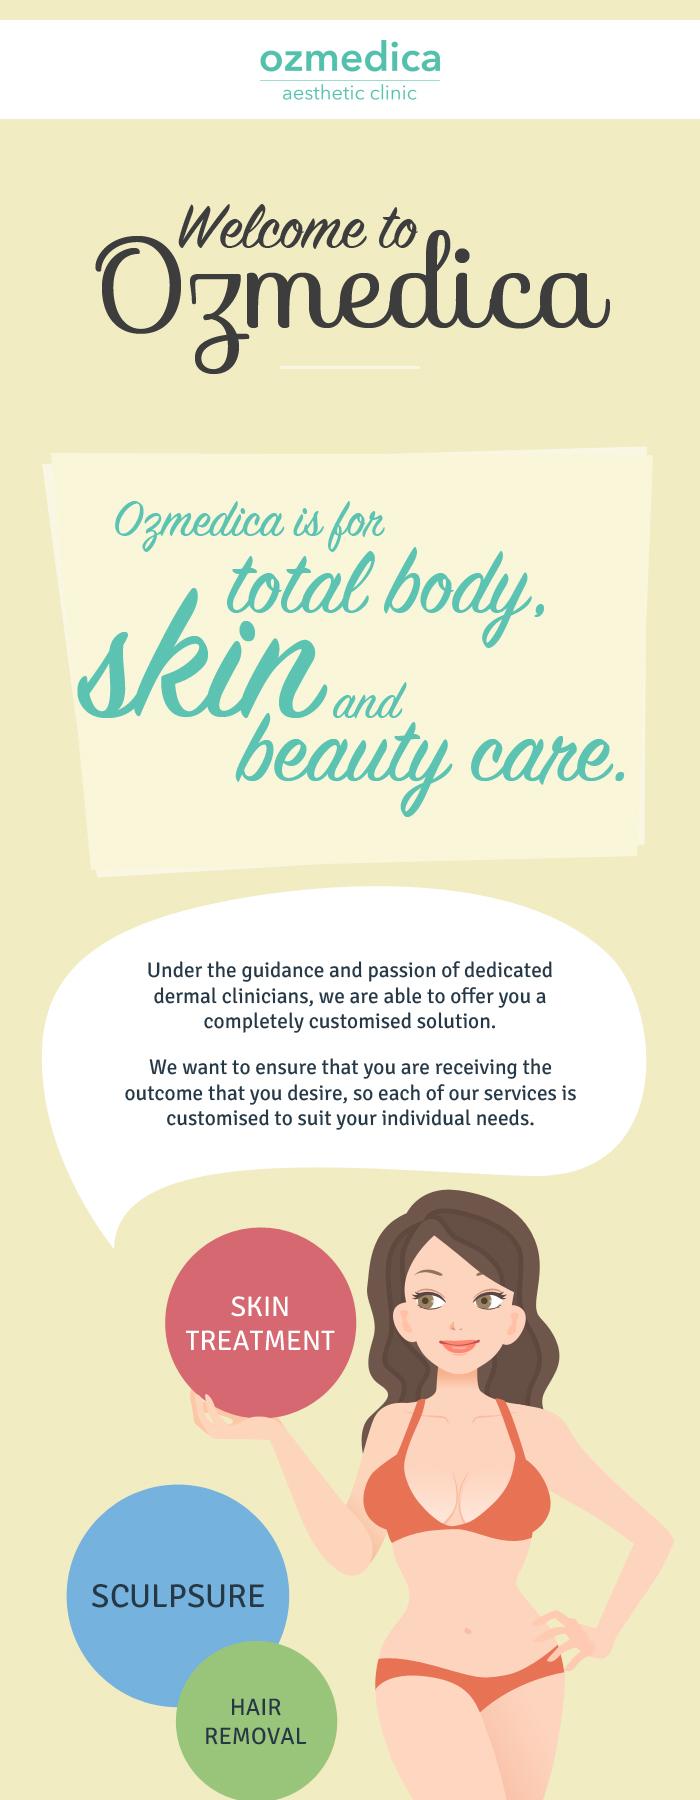 Get Total Body Skin and Beauty Care Services from Ozmedica Aesthetic Clinic